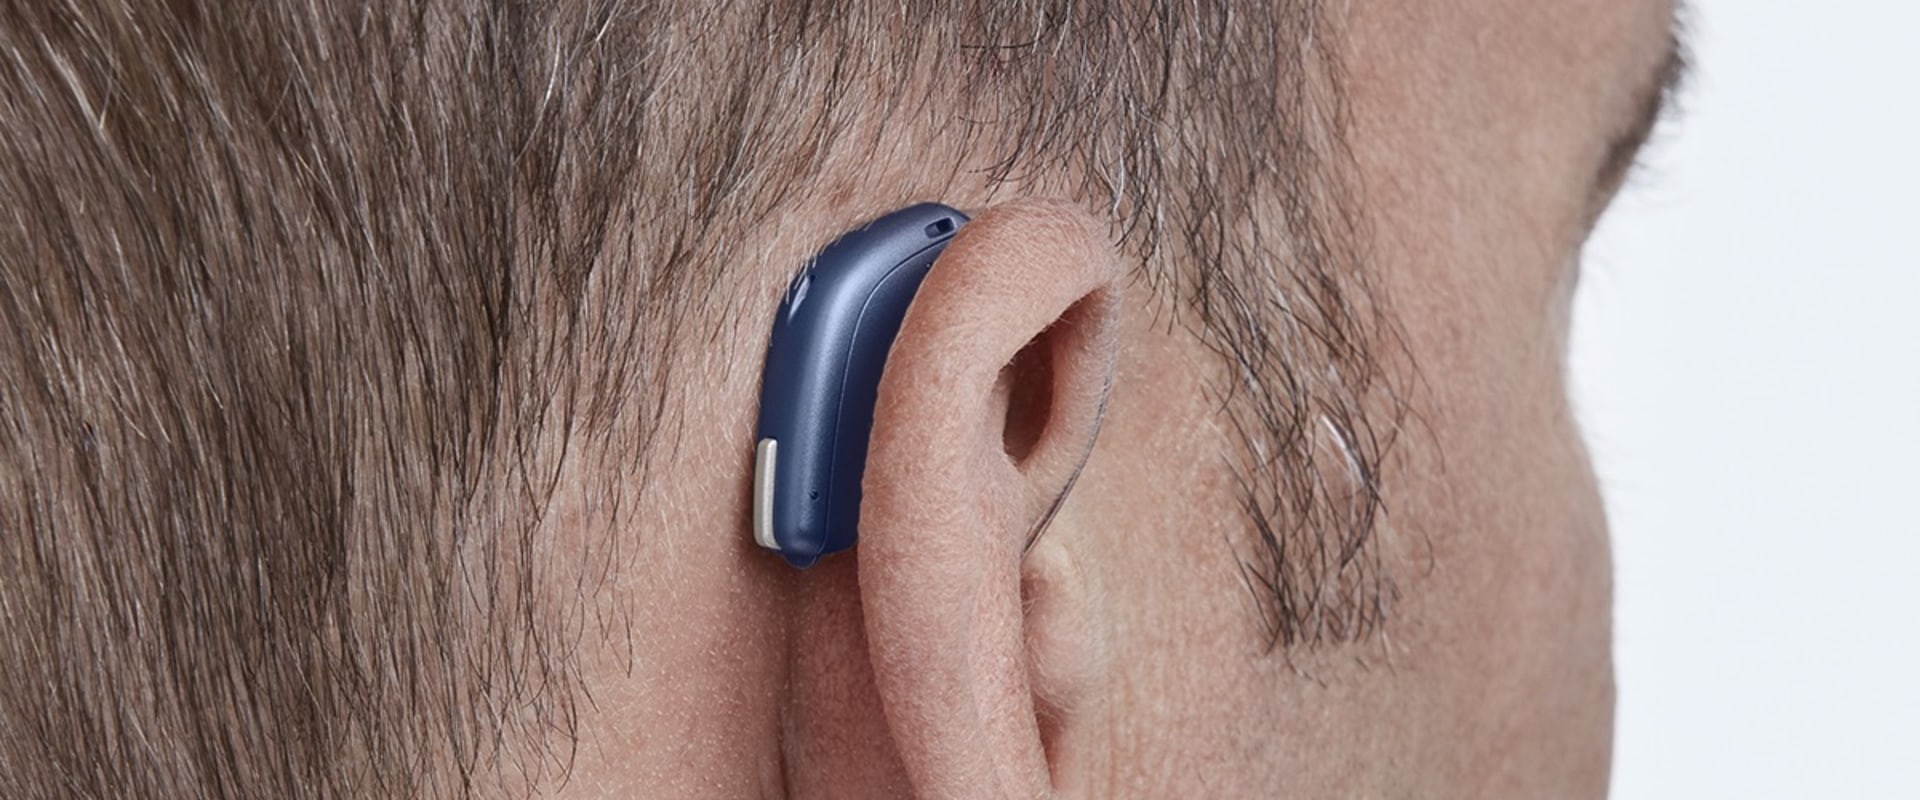 What is the life expectancy of costco hearing aids?